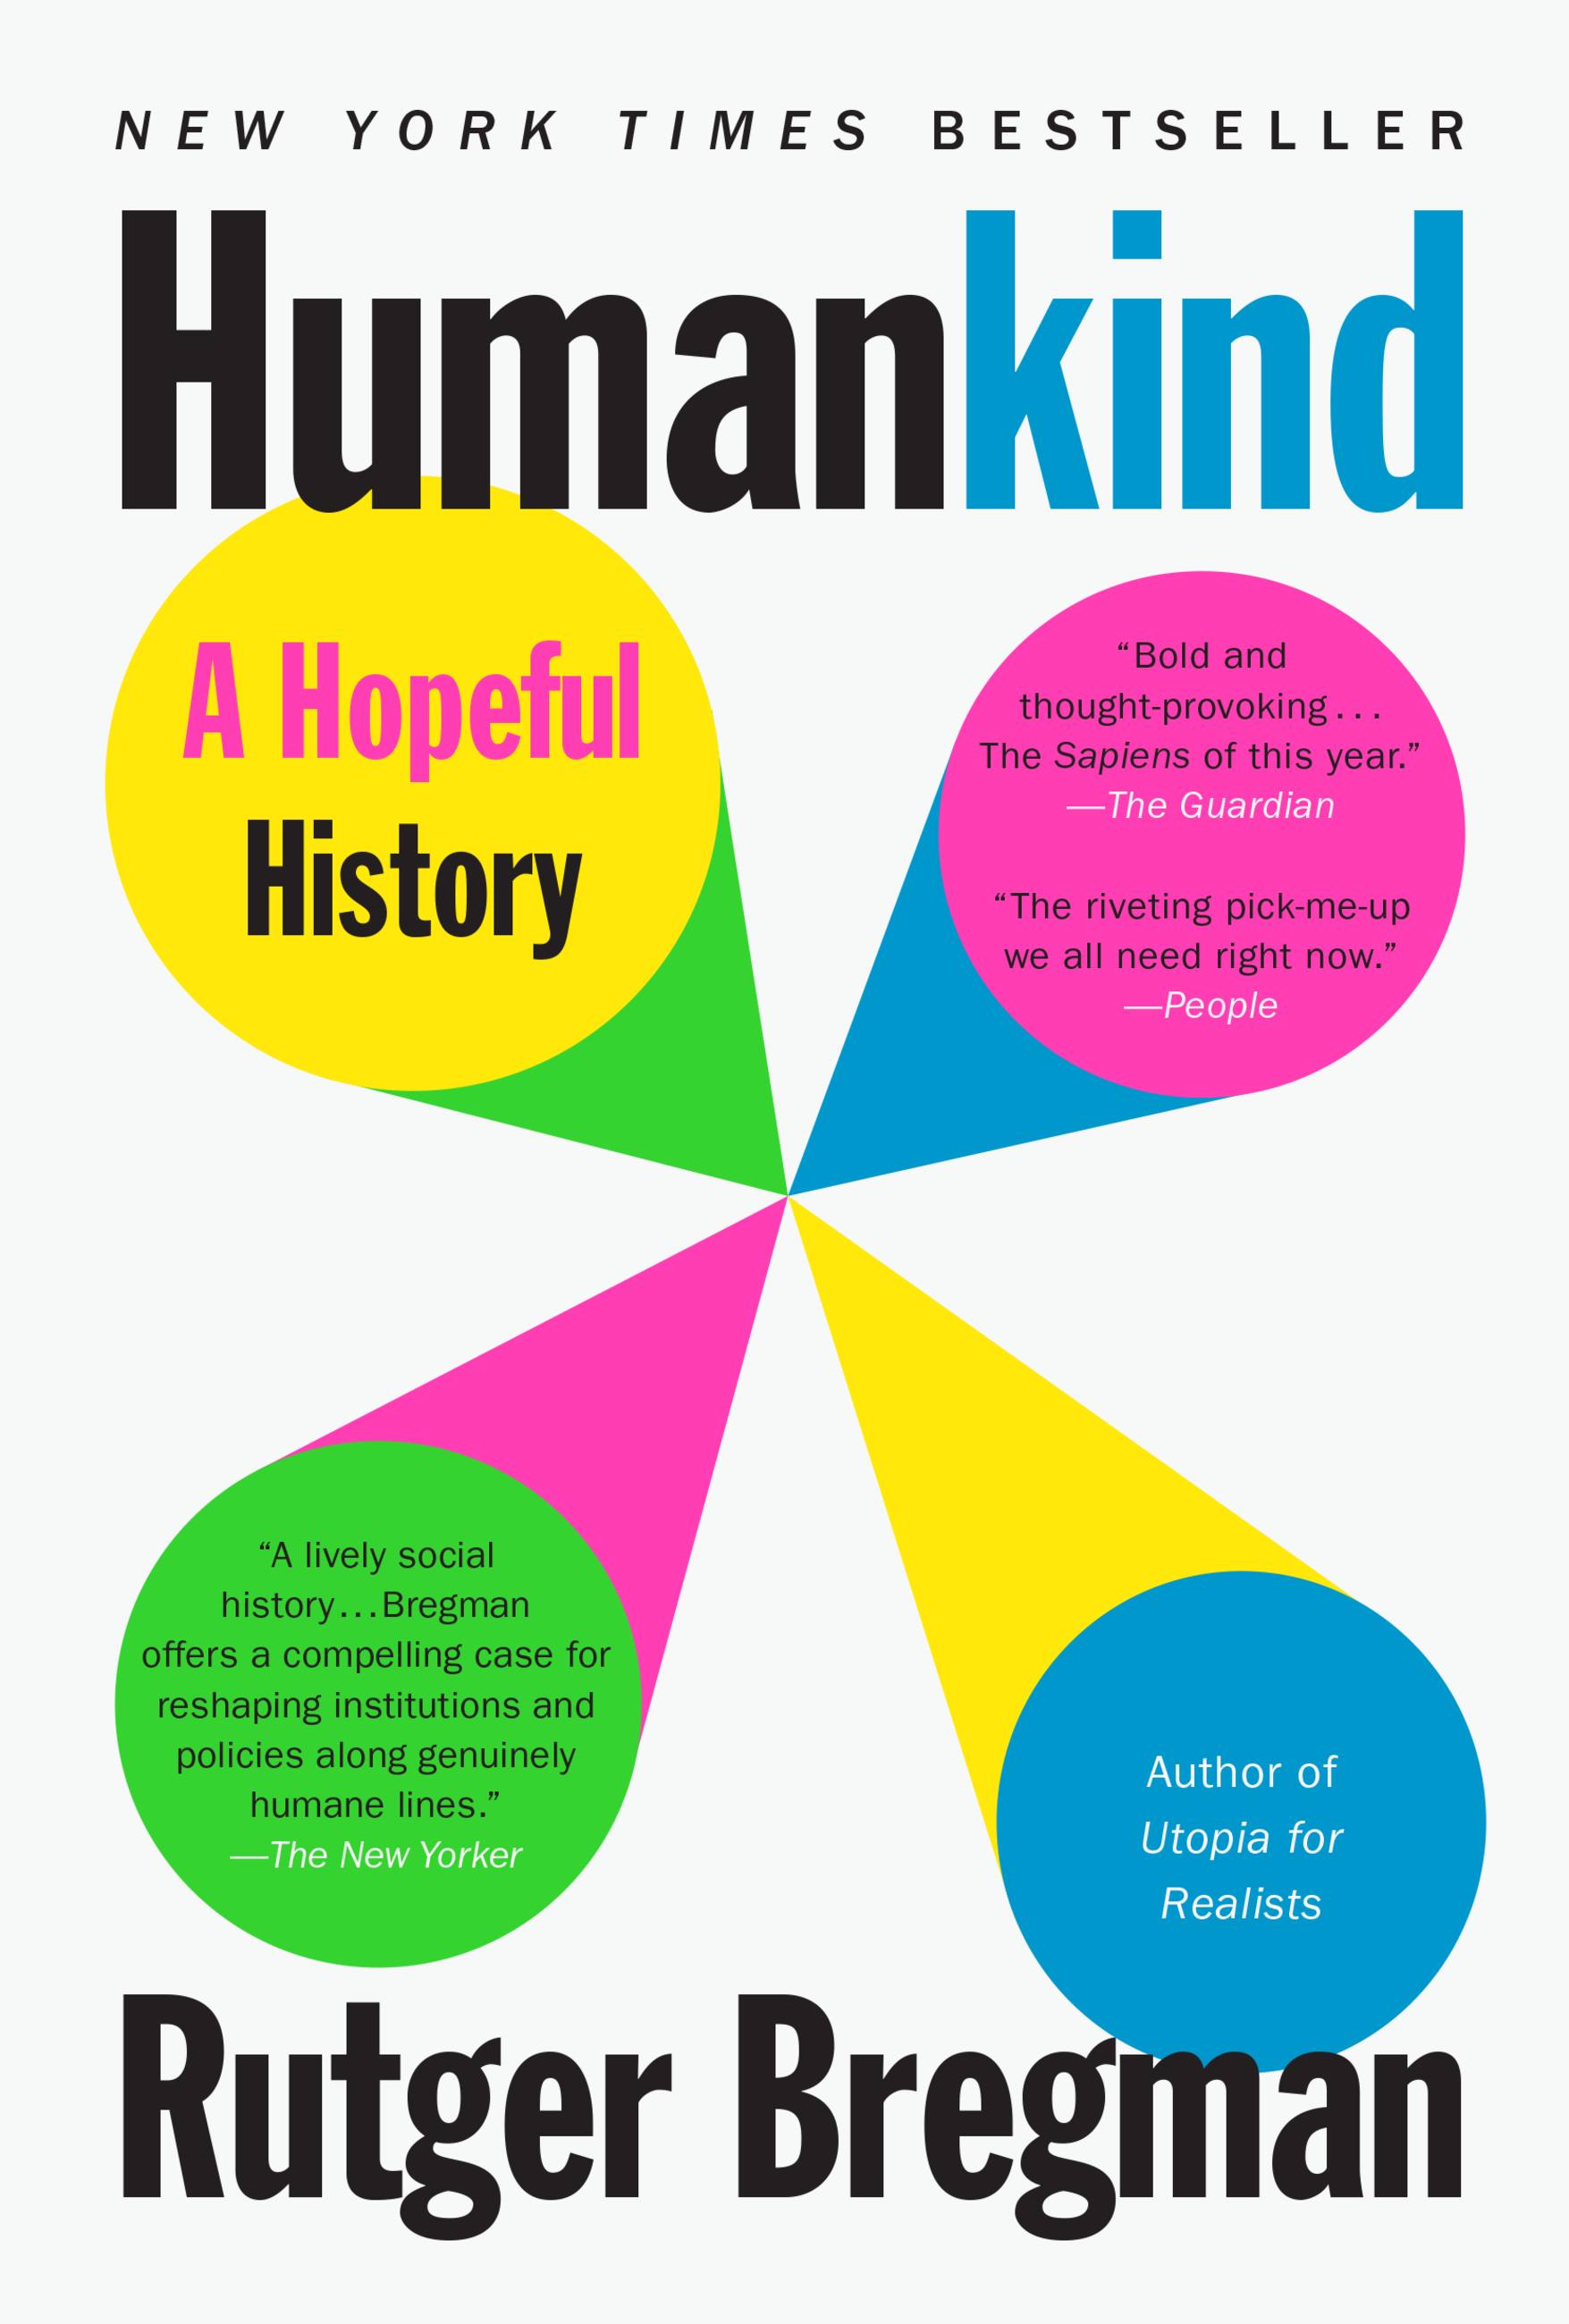 Hachette　Rutger　Book　Bregman　Group　Humankind　by